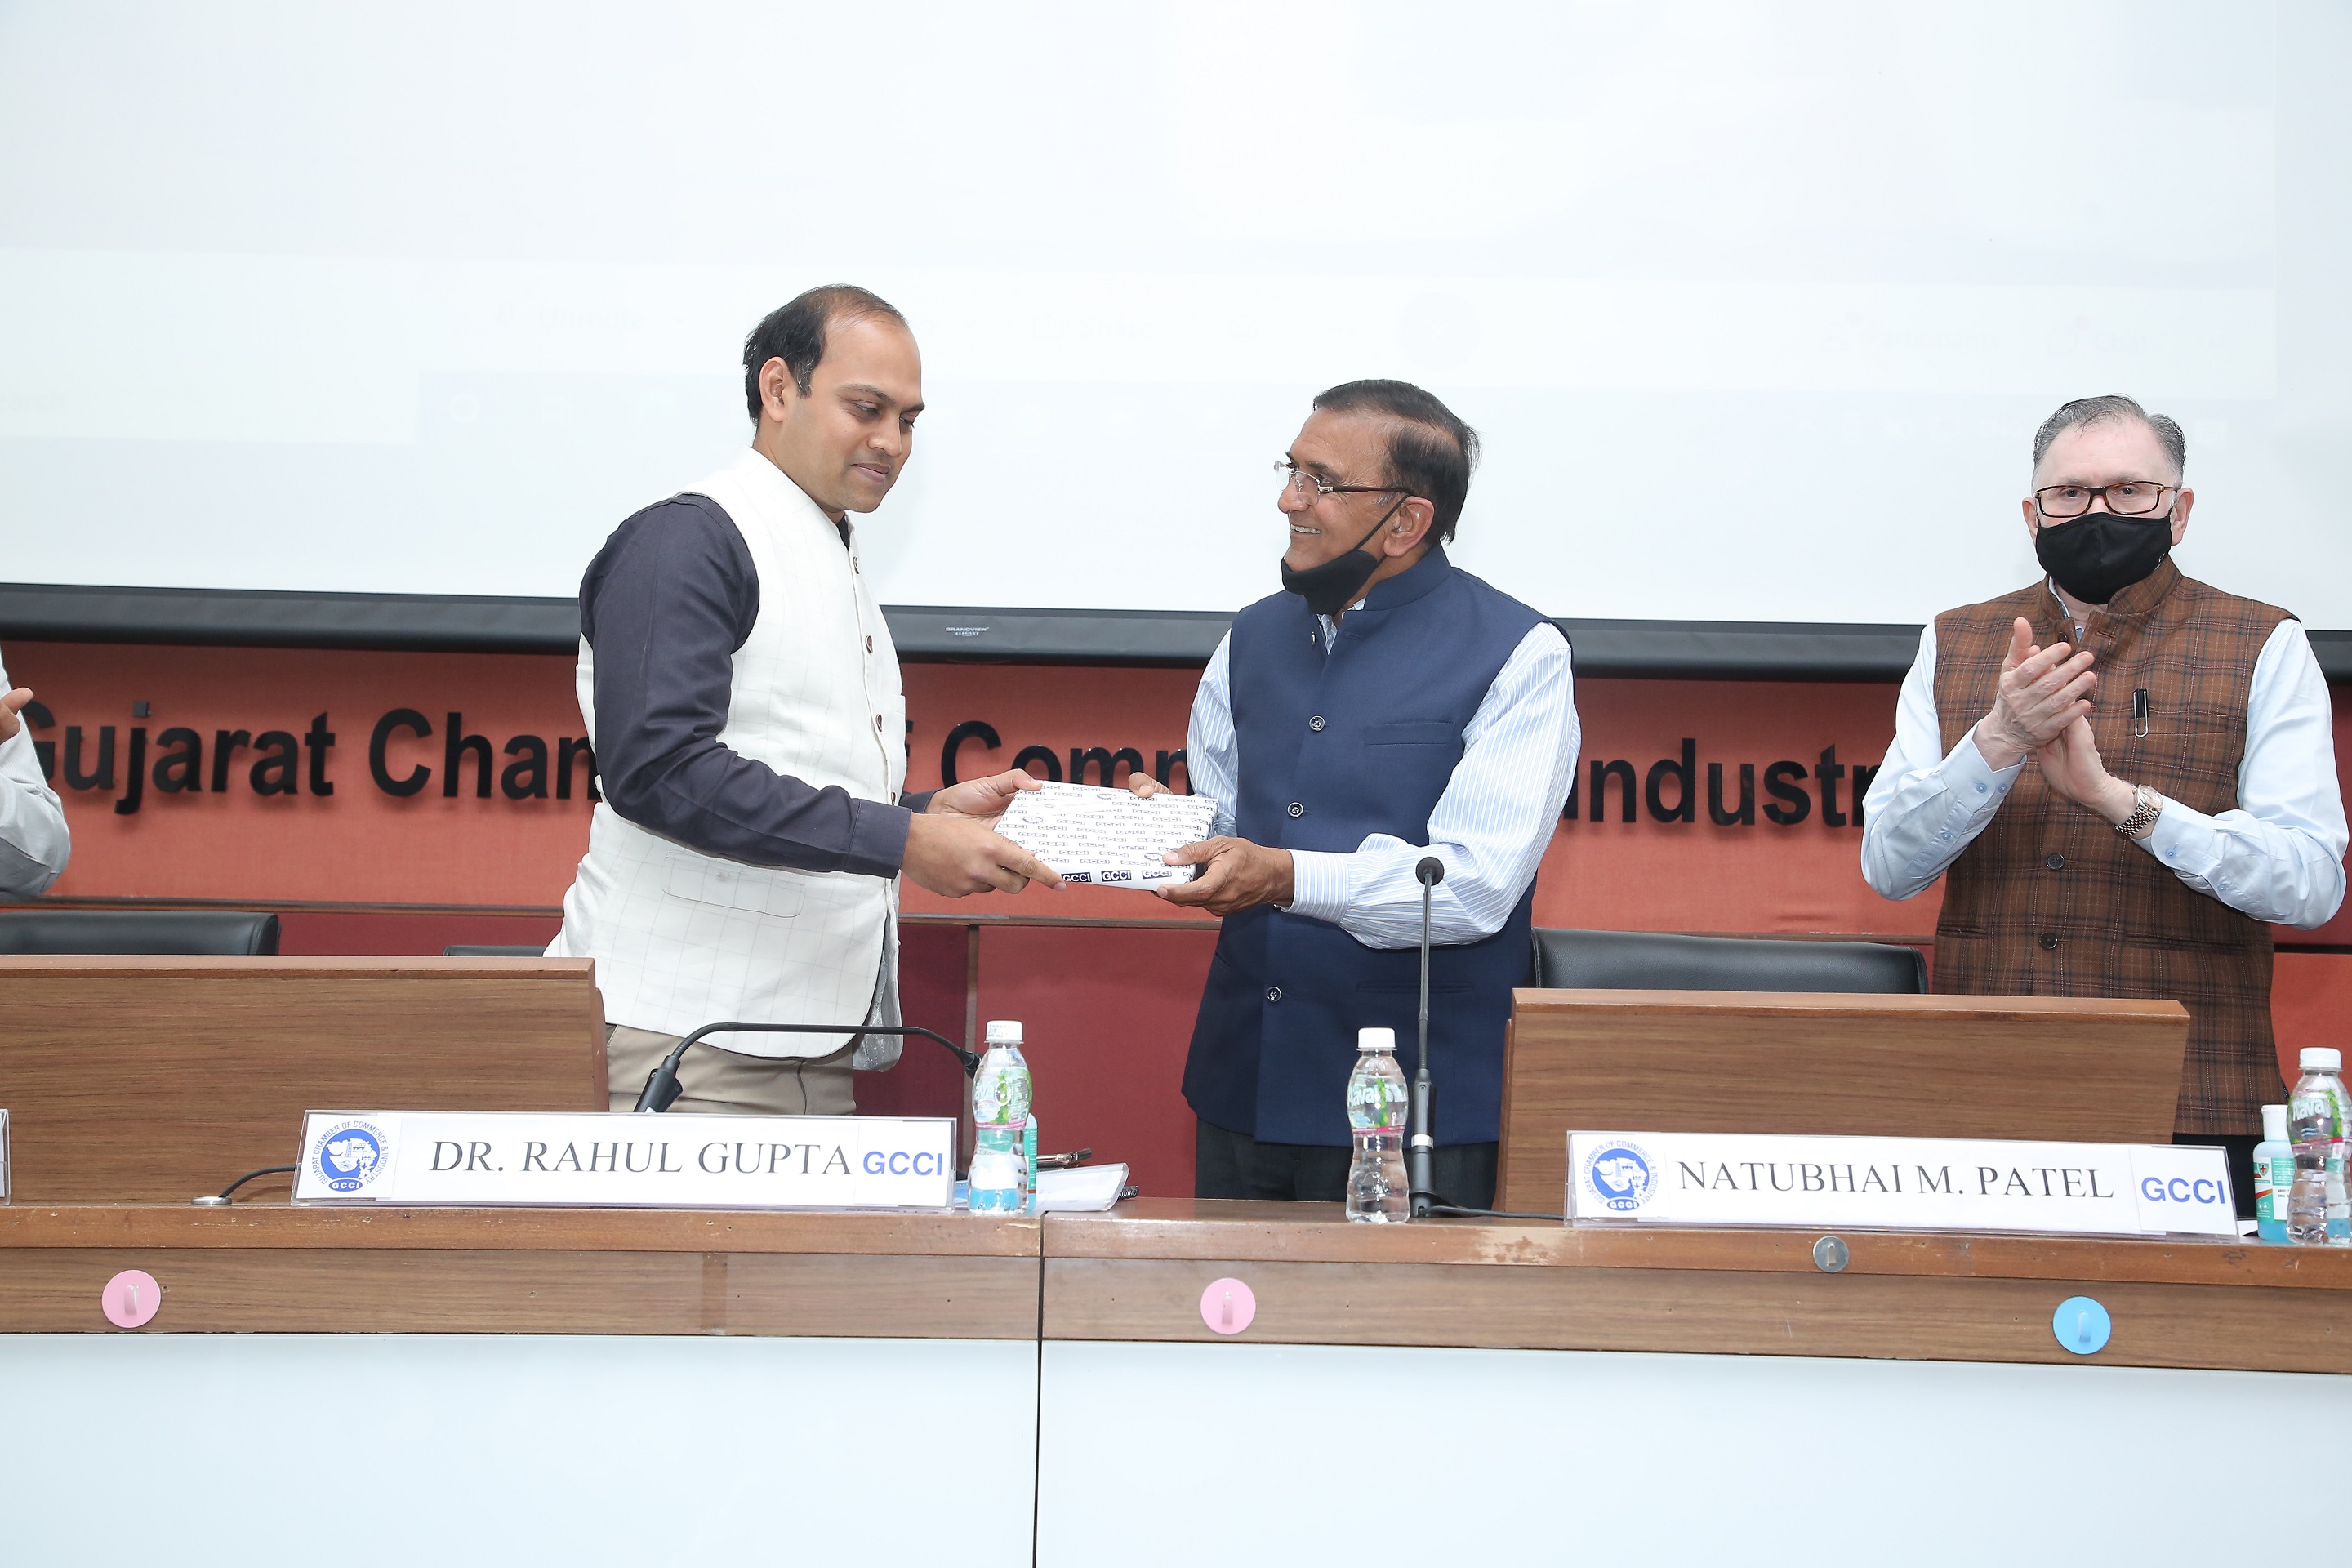 Interactive session on the New Industrial Policy 2020 with Dr. Rahul Gupta, IAS Industries Commissioner and Chairman iNDEXTb, Government of Gujarat